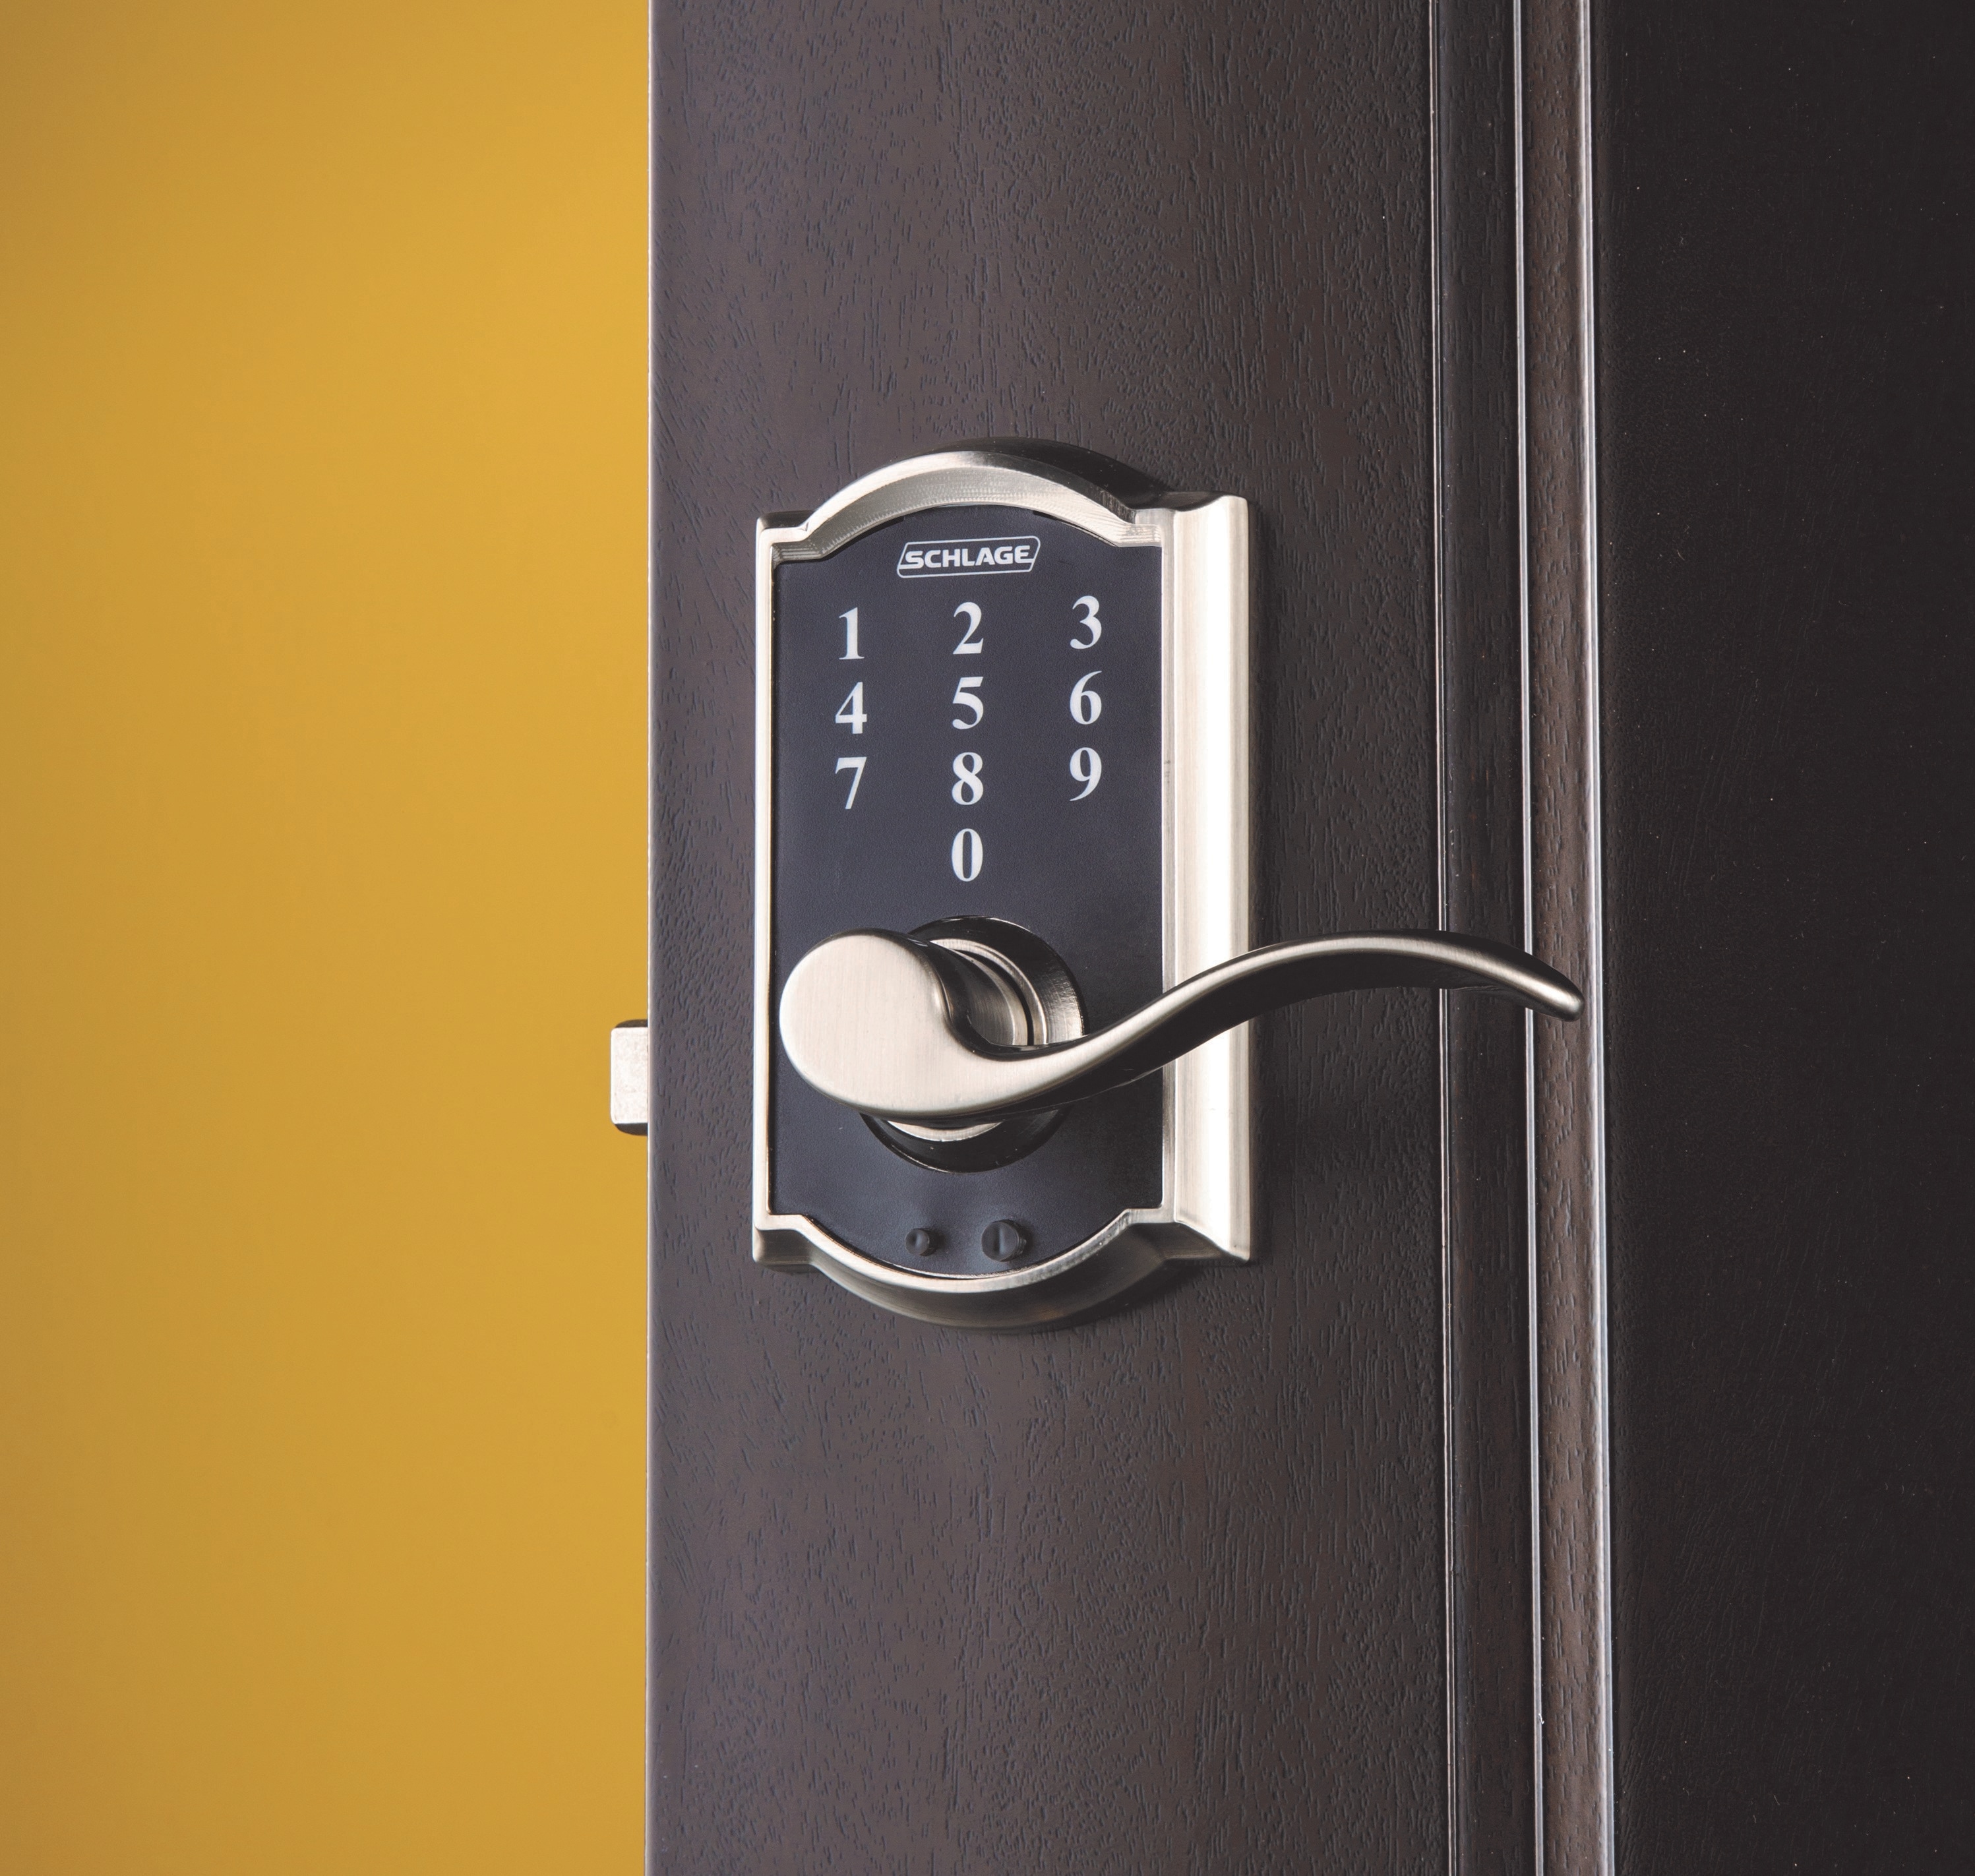 Schlage Touch Camelot Satin Nickel Electronic Deadbolt Lighted